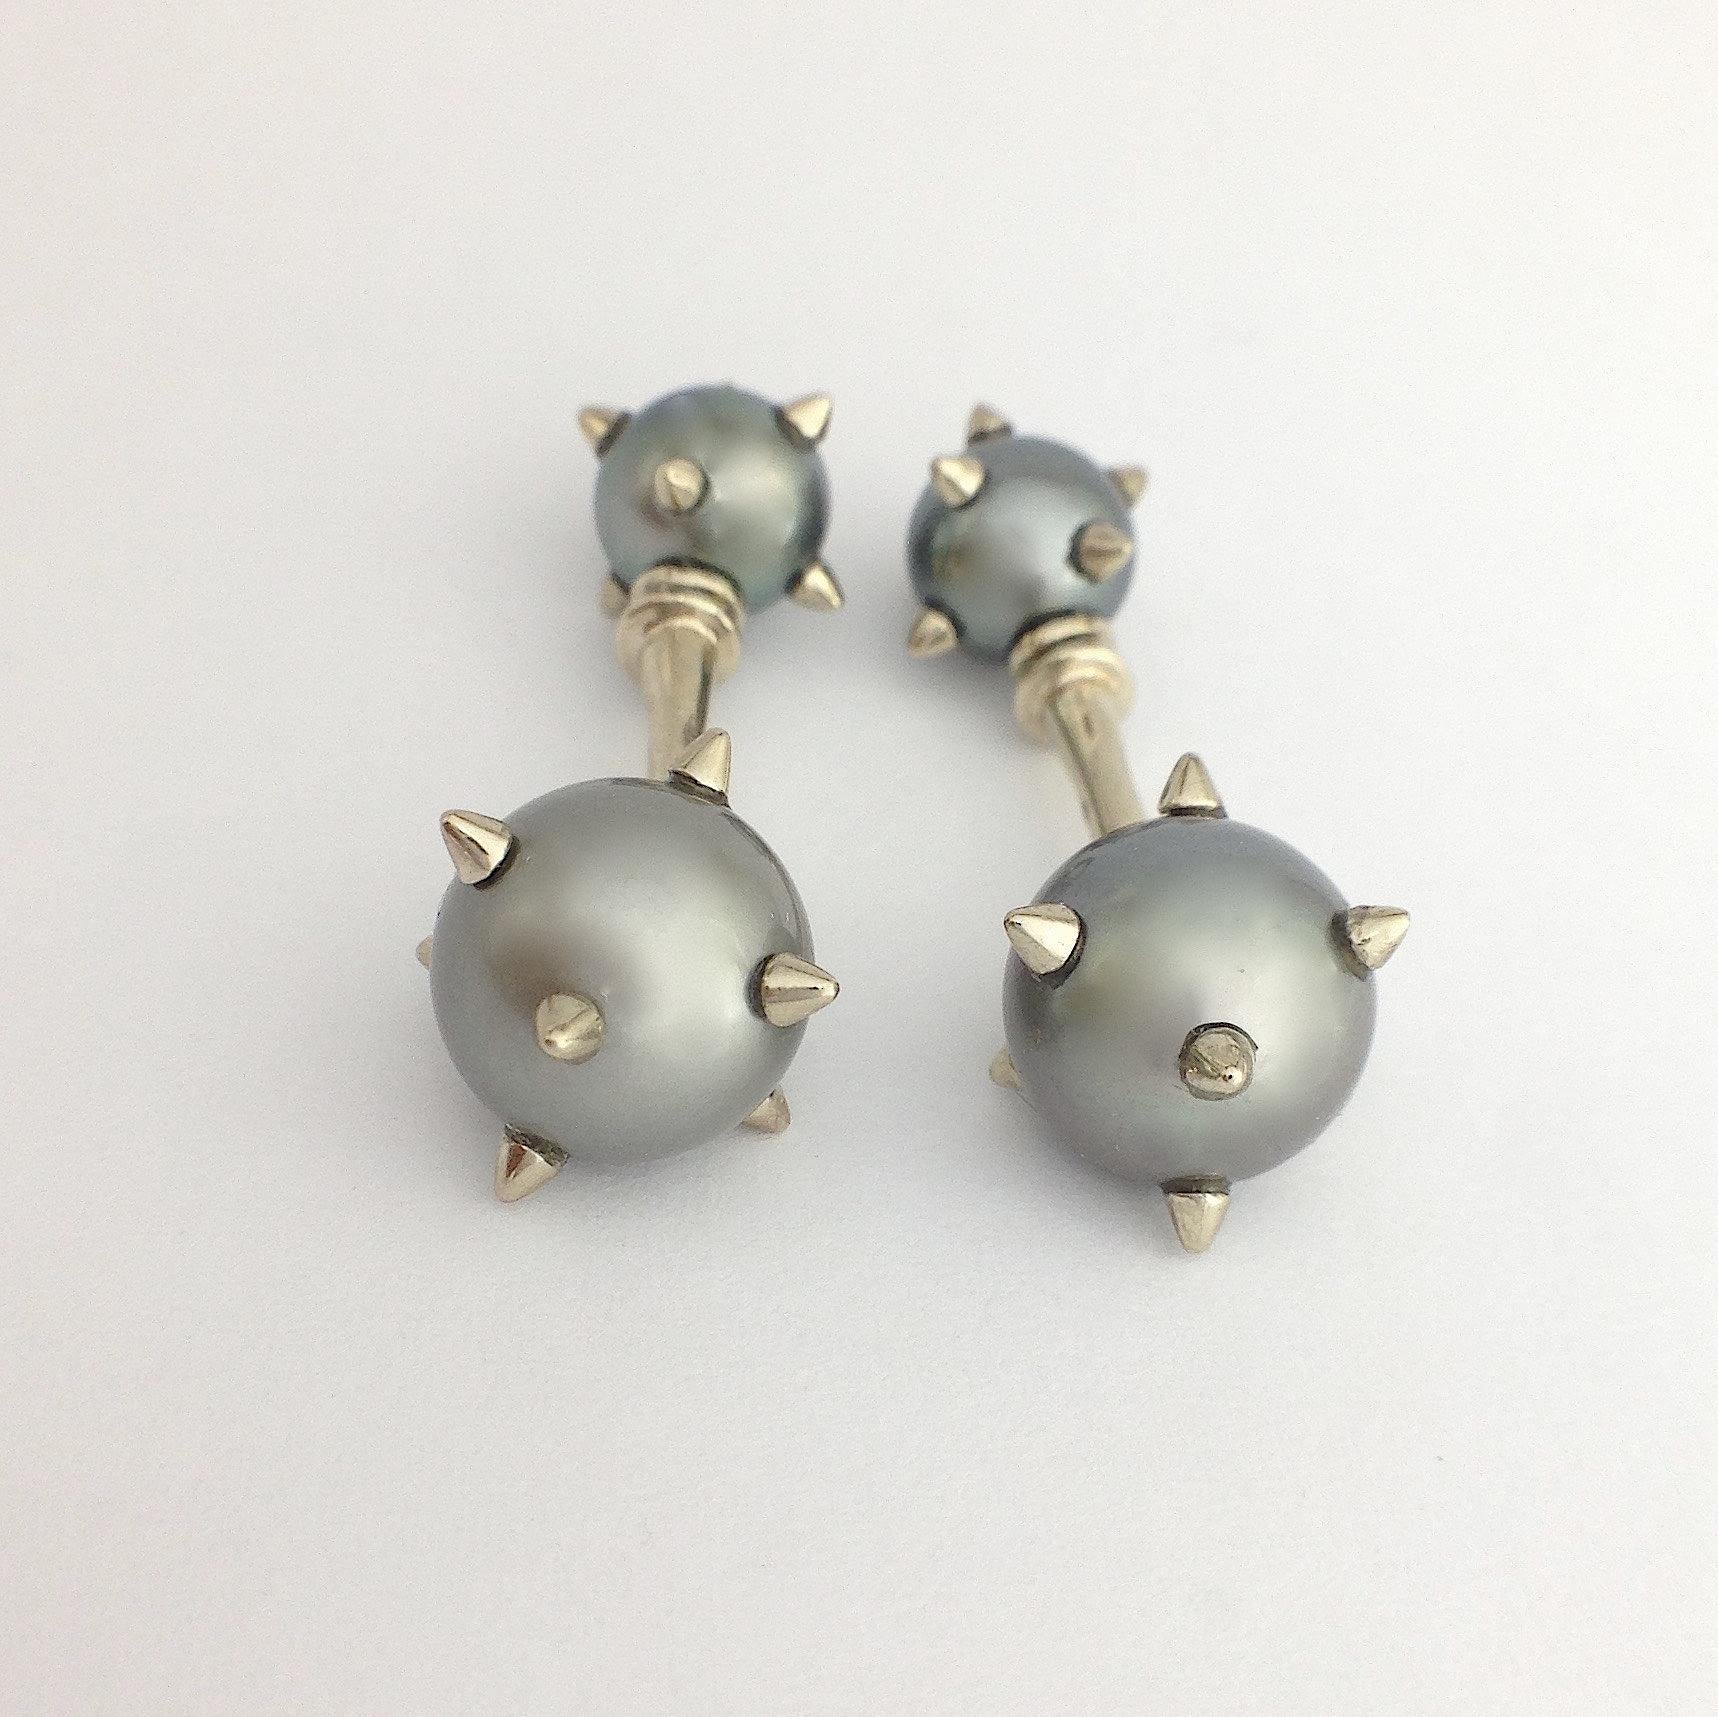 Morning Star Cufflinks South Sea Pearl 18 Karat Gold Made in Italy 
This pair of cufflinks, totally handmade, are made of white gold and have four Tahitian pearls.
The pearls each have seven spines and recall an ancient medieval weapon: the spiked